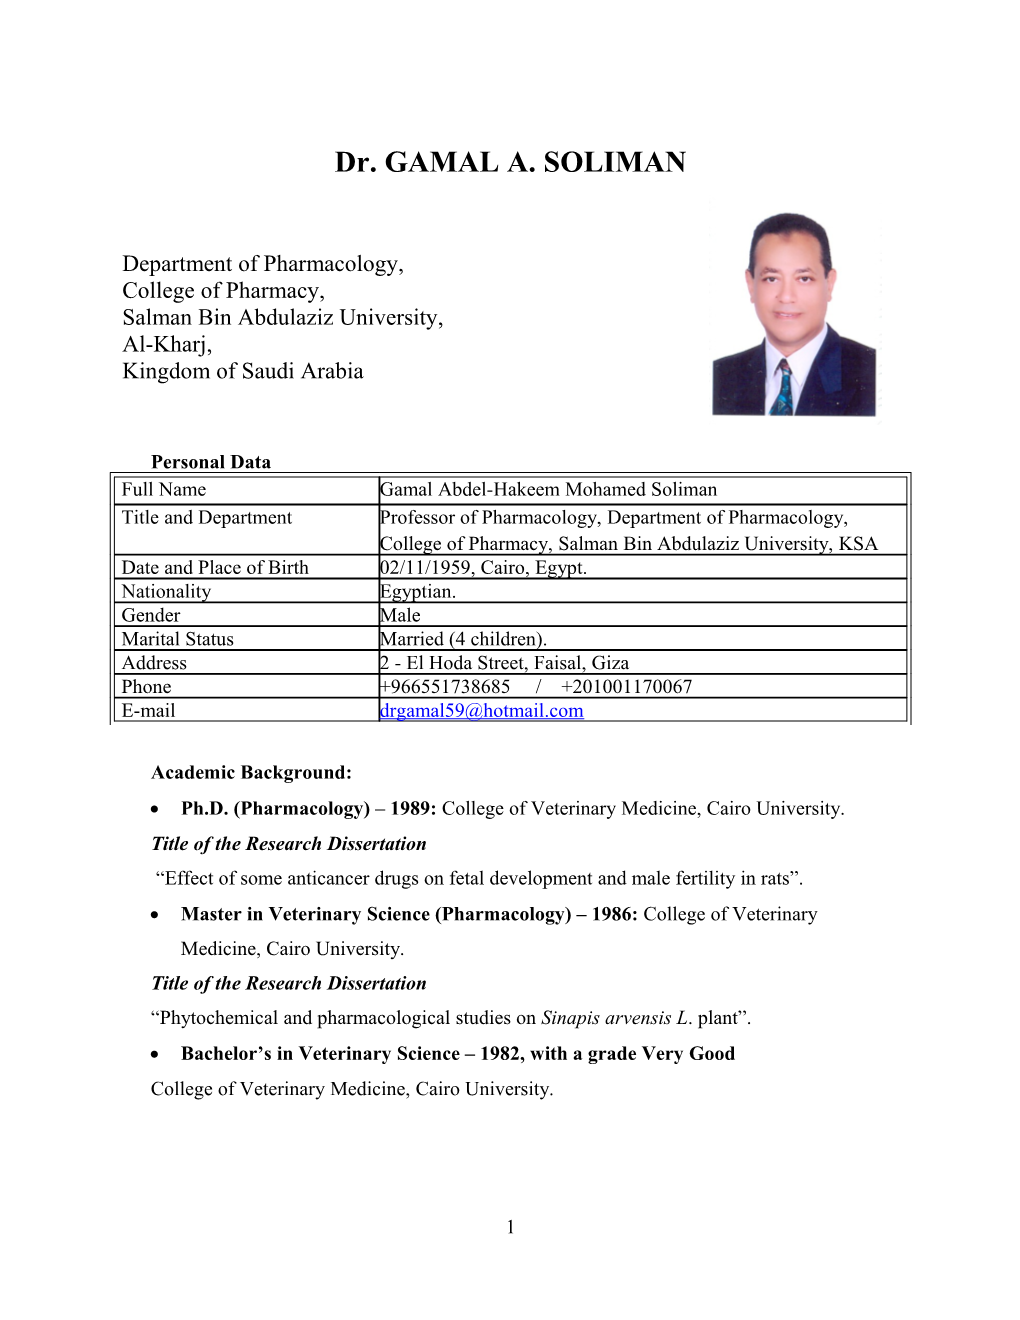 Dr. GAMAL A. SOLIMAN